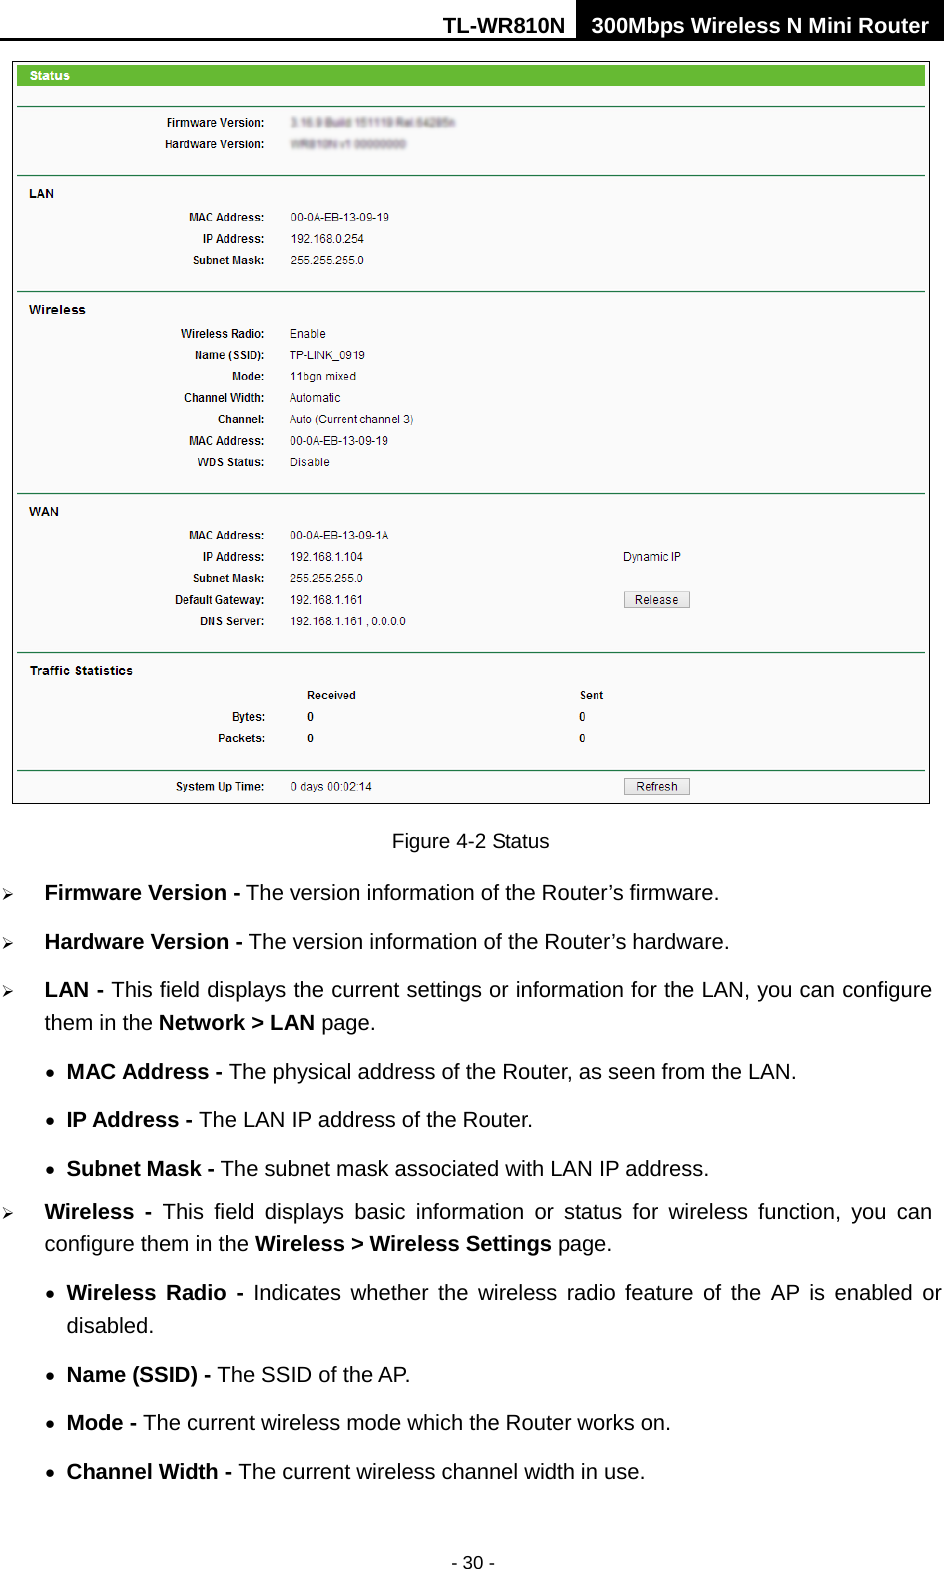 TL-WR810N 300Mbps Wireless N Mini Router  - 30 -  Figure 4-2 Status  Firmware Version - The version information of the Router’s firmware.  Hardware Version - The version information of the Router’s hardware.  LAN - This field displays the current settings or information for the LAN, you can configure them in the Network &gt; LAN page.   • MAC Address - The physical address of the Router, as seen from the LAN. • IP Address - The LAN IP address of the Router. • Subnet Mask - The subnet mask associated with LAN IP address.  Wireless -  This field displays basic information or status for wireless function, you can configure them in the Wireless &gt; Wireless Settings page.   • Wireless Radio - Indicates whether the wireless radio feature of the AP is enabled or disabled. • Name (SSID) - The SSID of the AP. • Mode - The current wireless mode which the Router works on. • Channel Width - The current wireless channel width in use. 